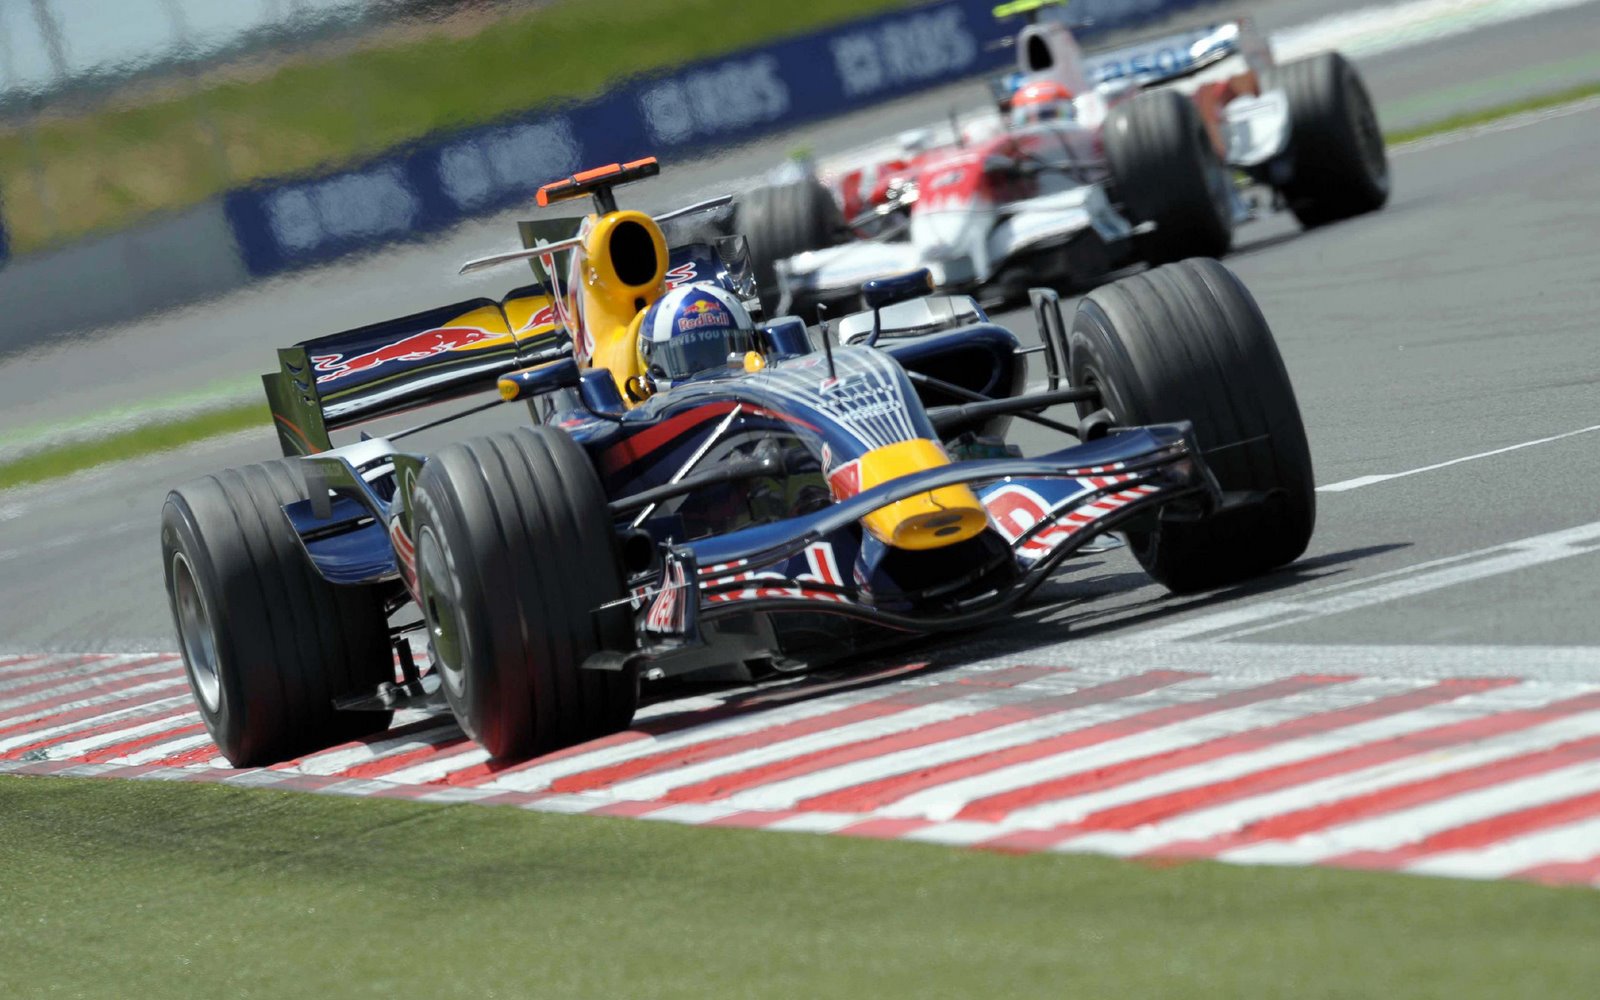 [David+Coulthard+Red+Bull+Friday+Free+Practise+France+Magny+Cours+13.jpg]